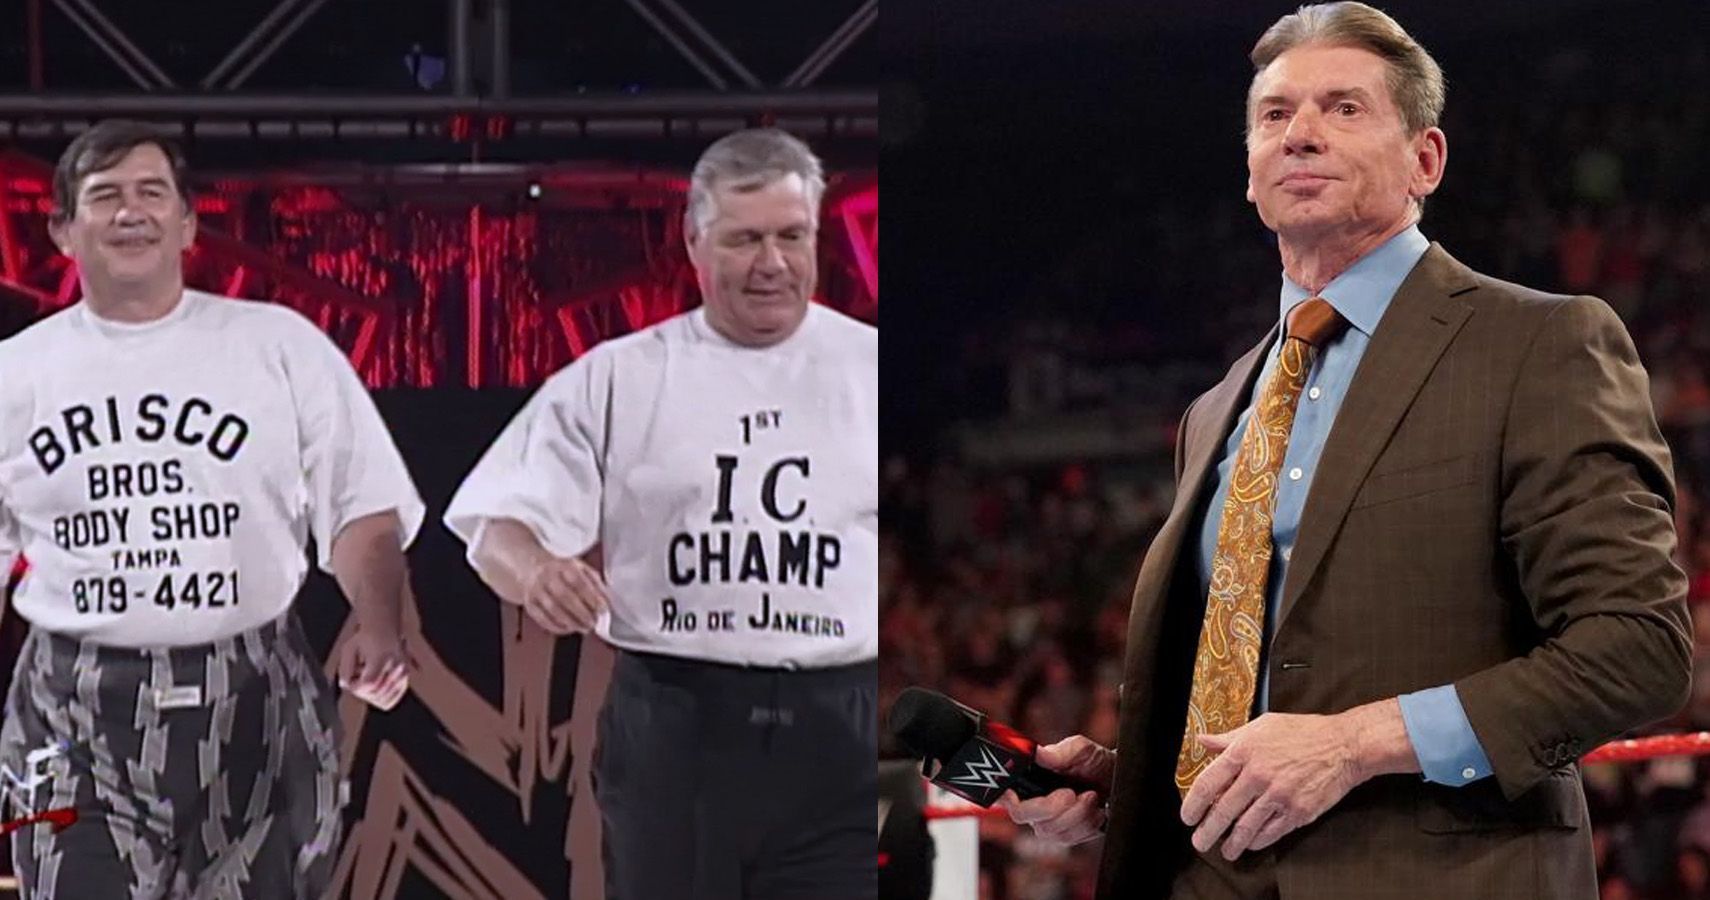 Vince McMahon loved to fart backstage, and poor Gerald Briscoe was usually in the line of fire.